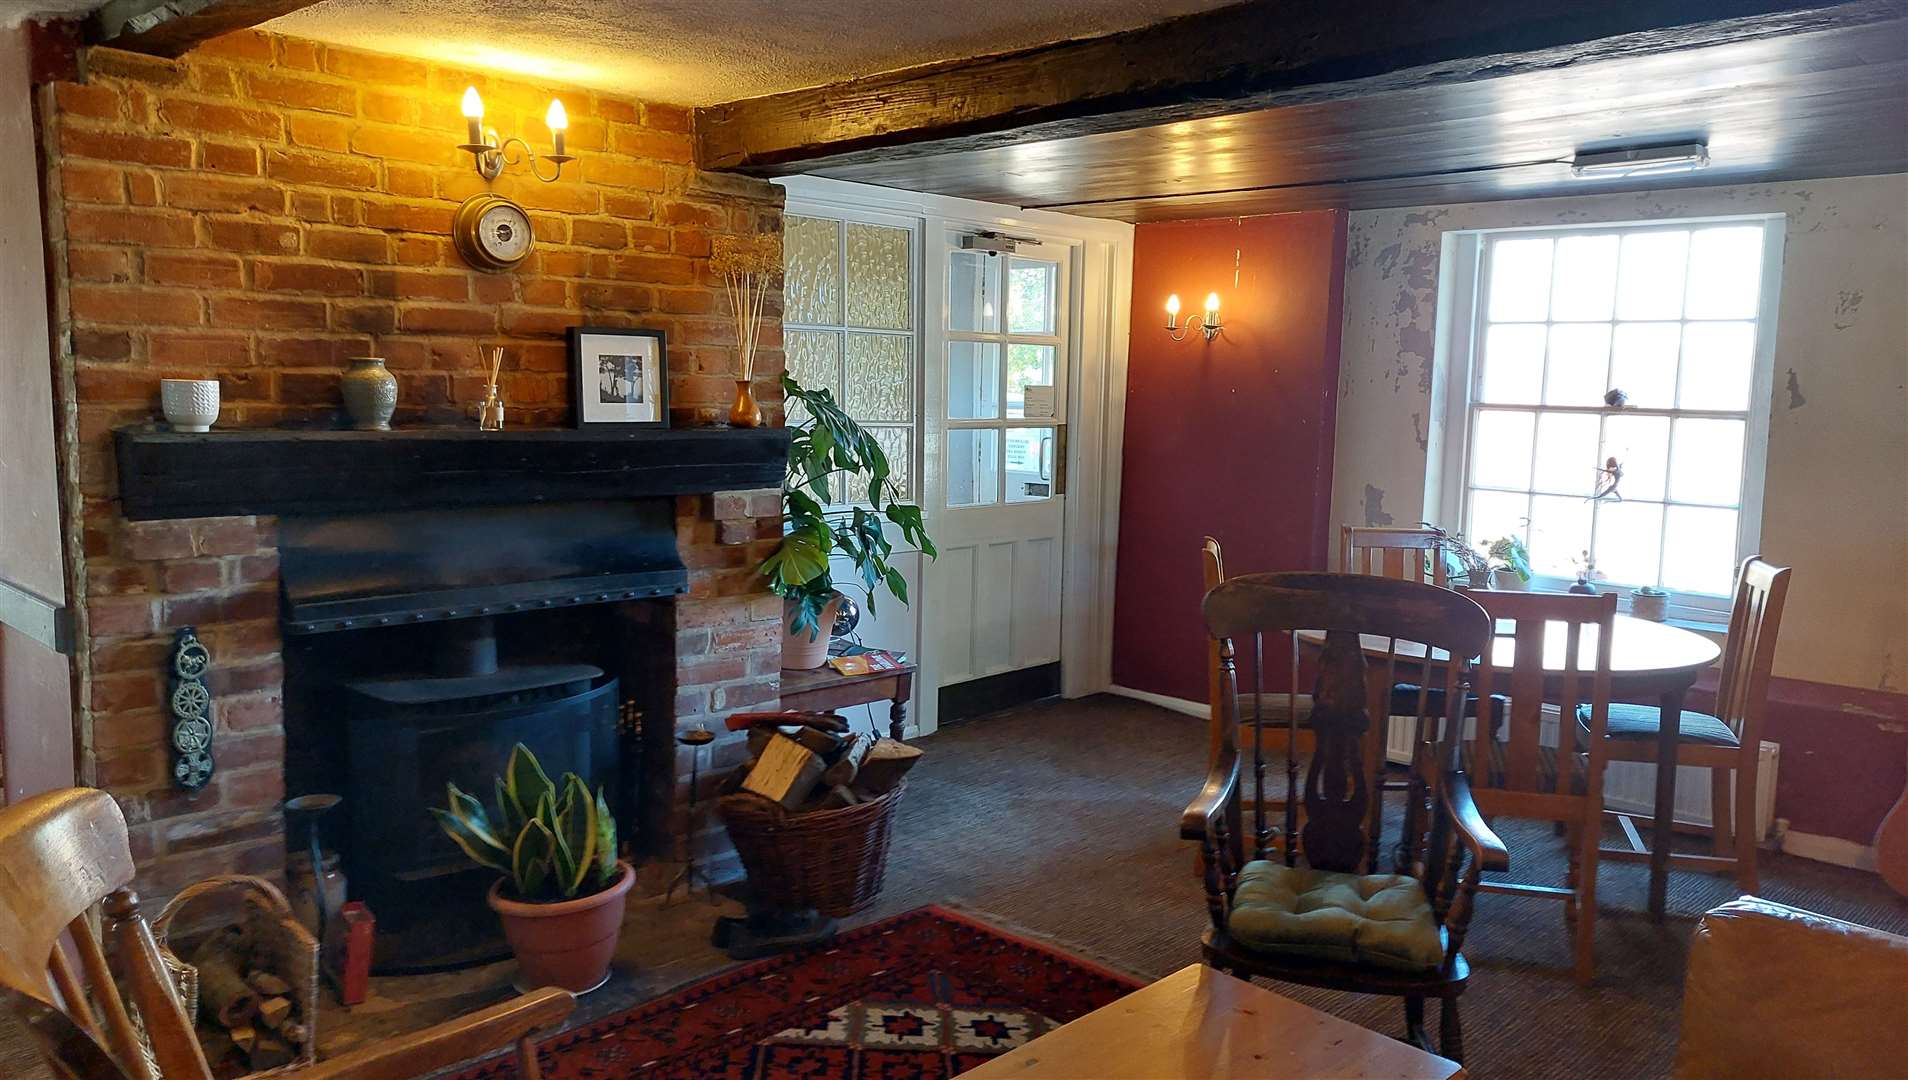 The inside of the 16th-century inn, which is set to be renovated